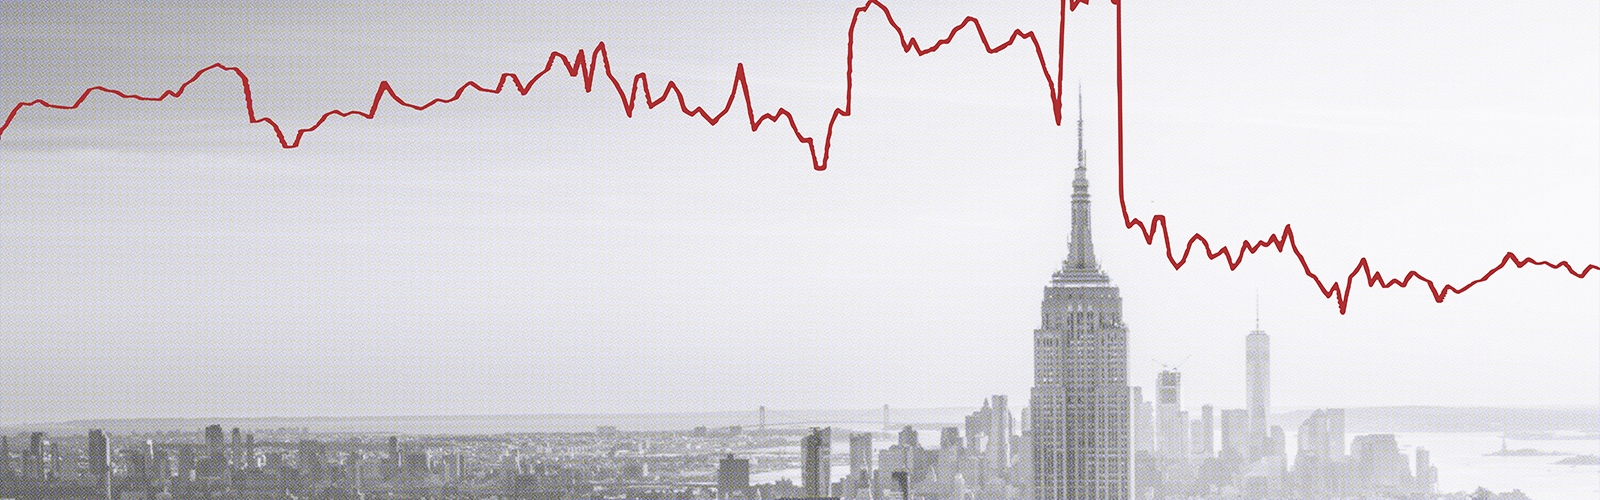 The Dow Jones Industrial Average stock line in red makes the skyline of New York City over the city skyline